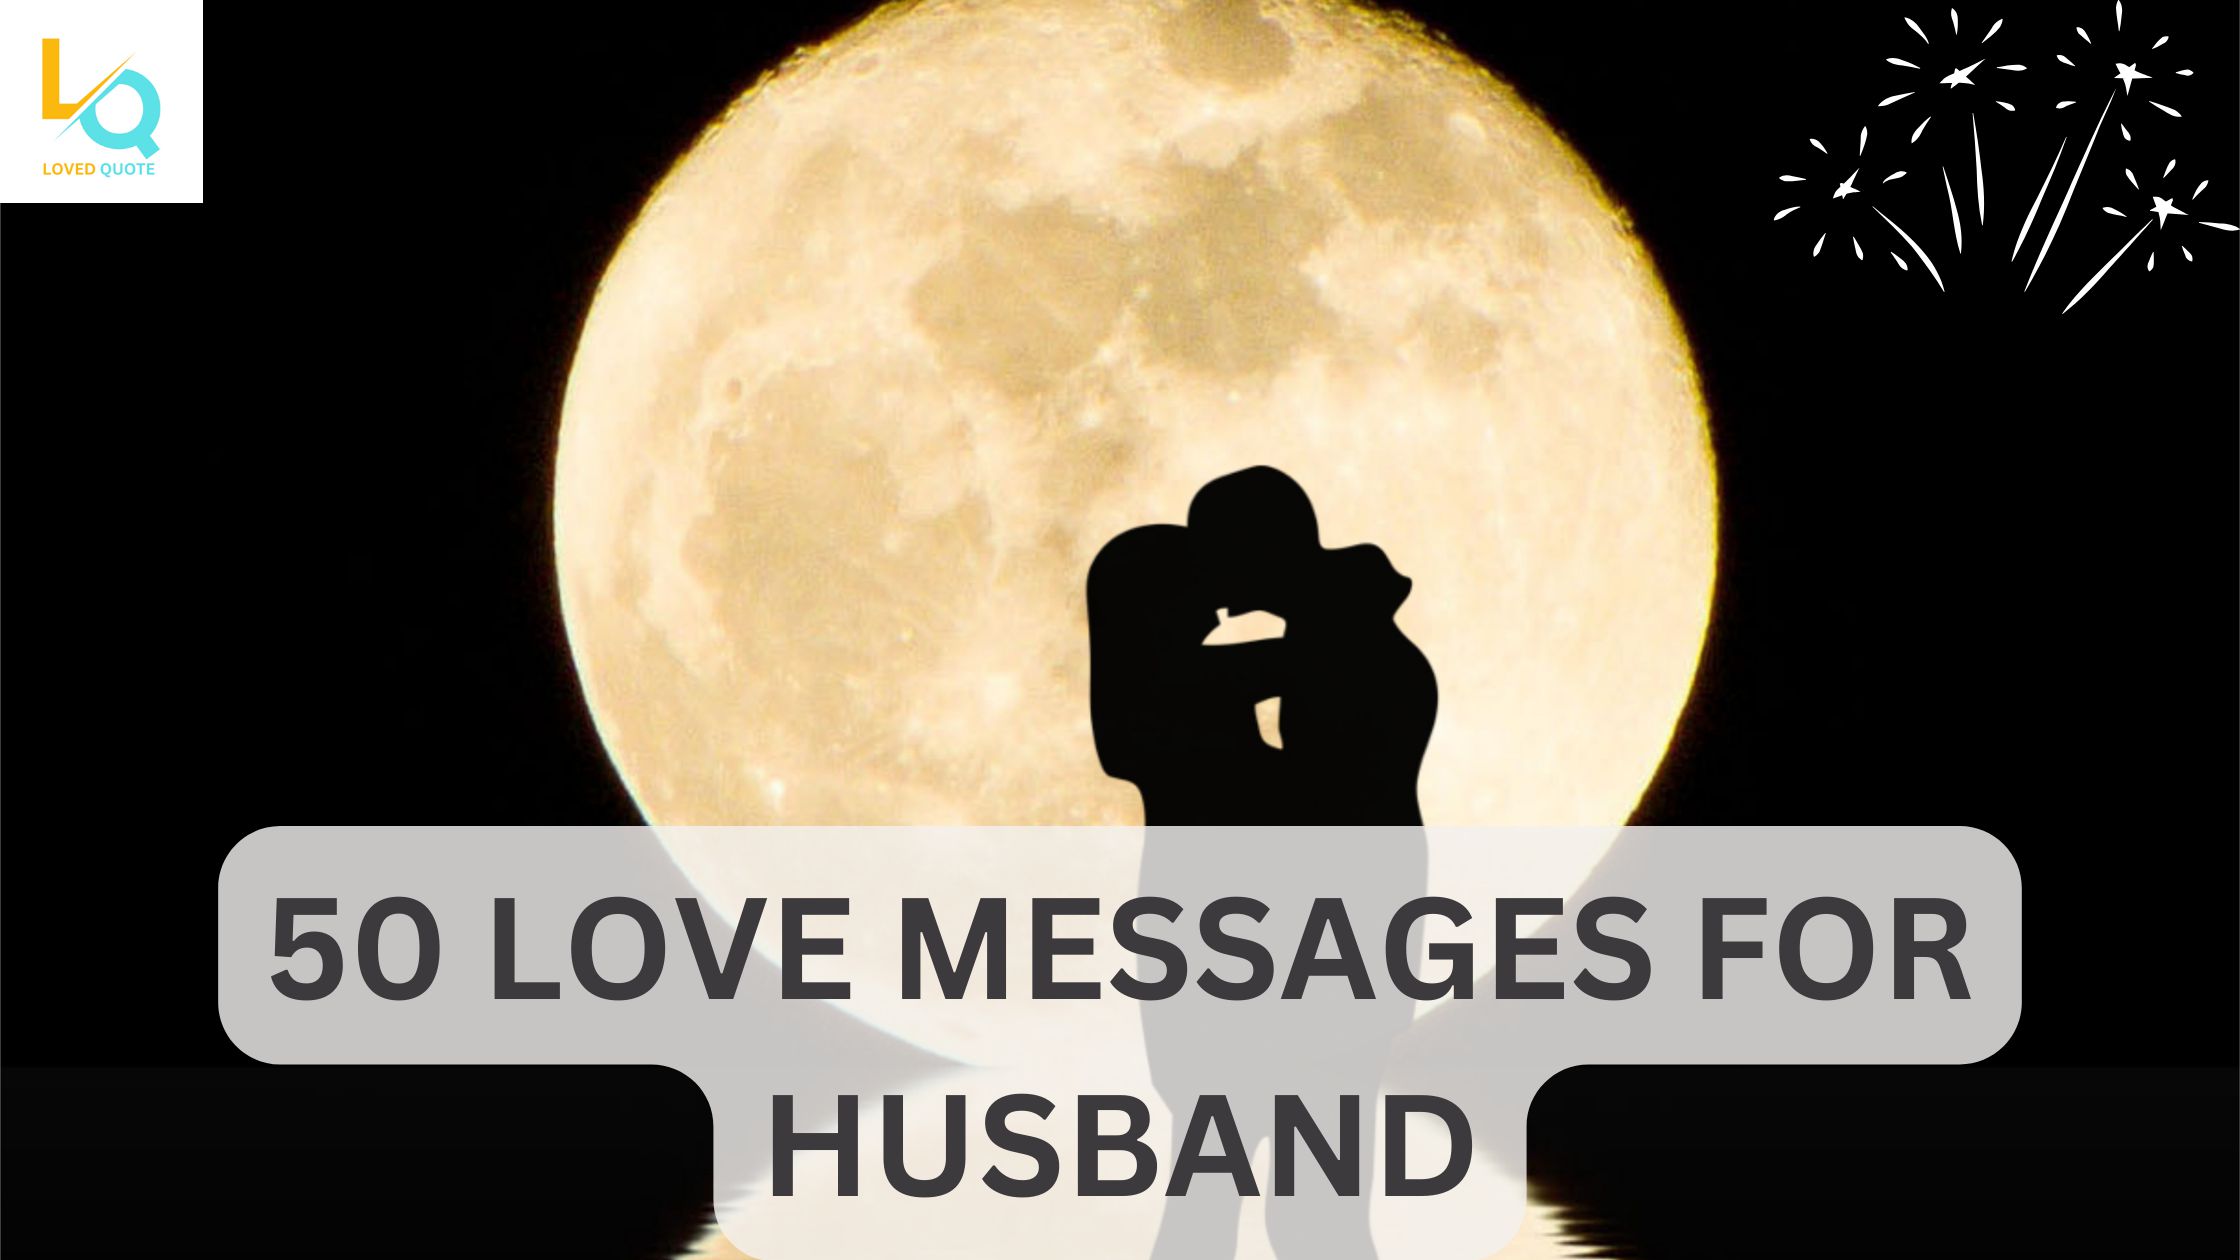 50 love messages for husband